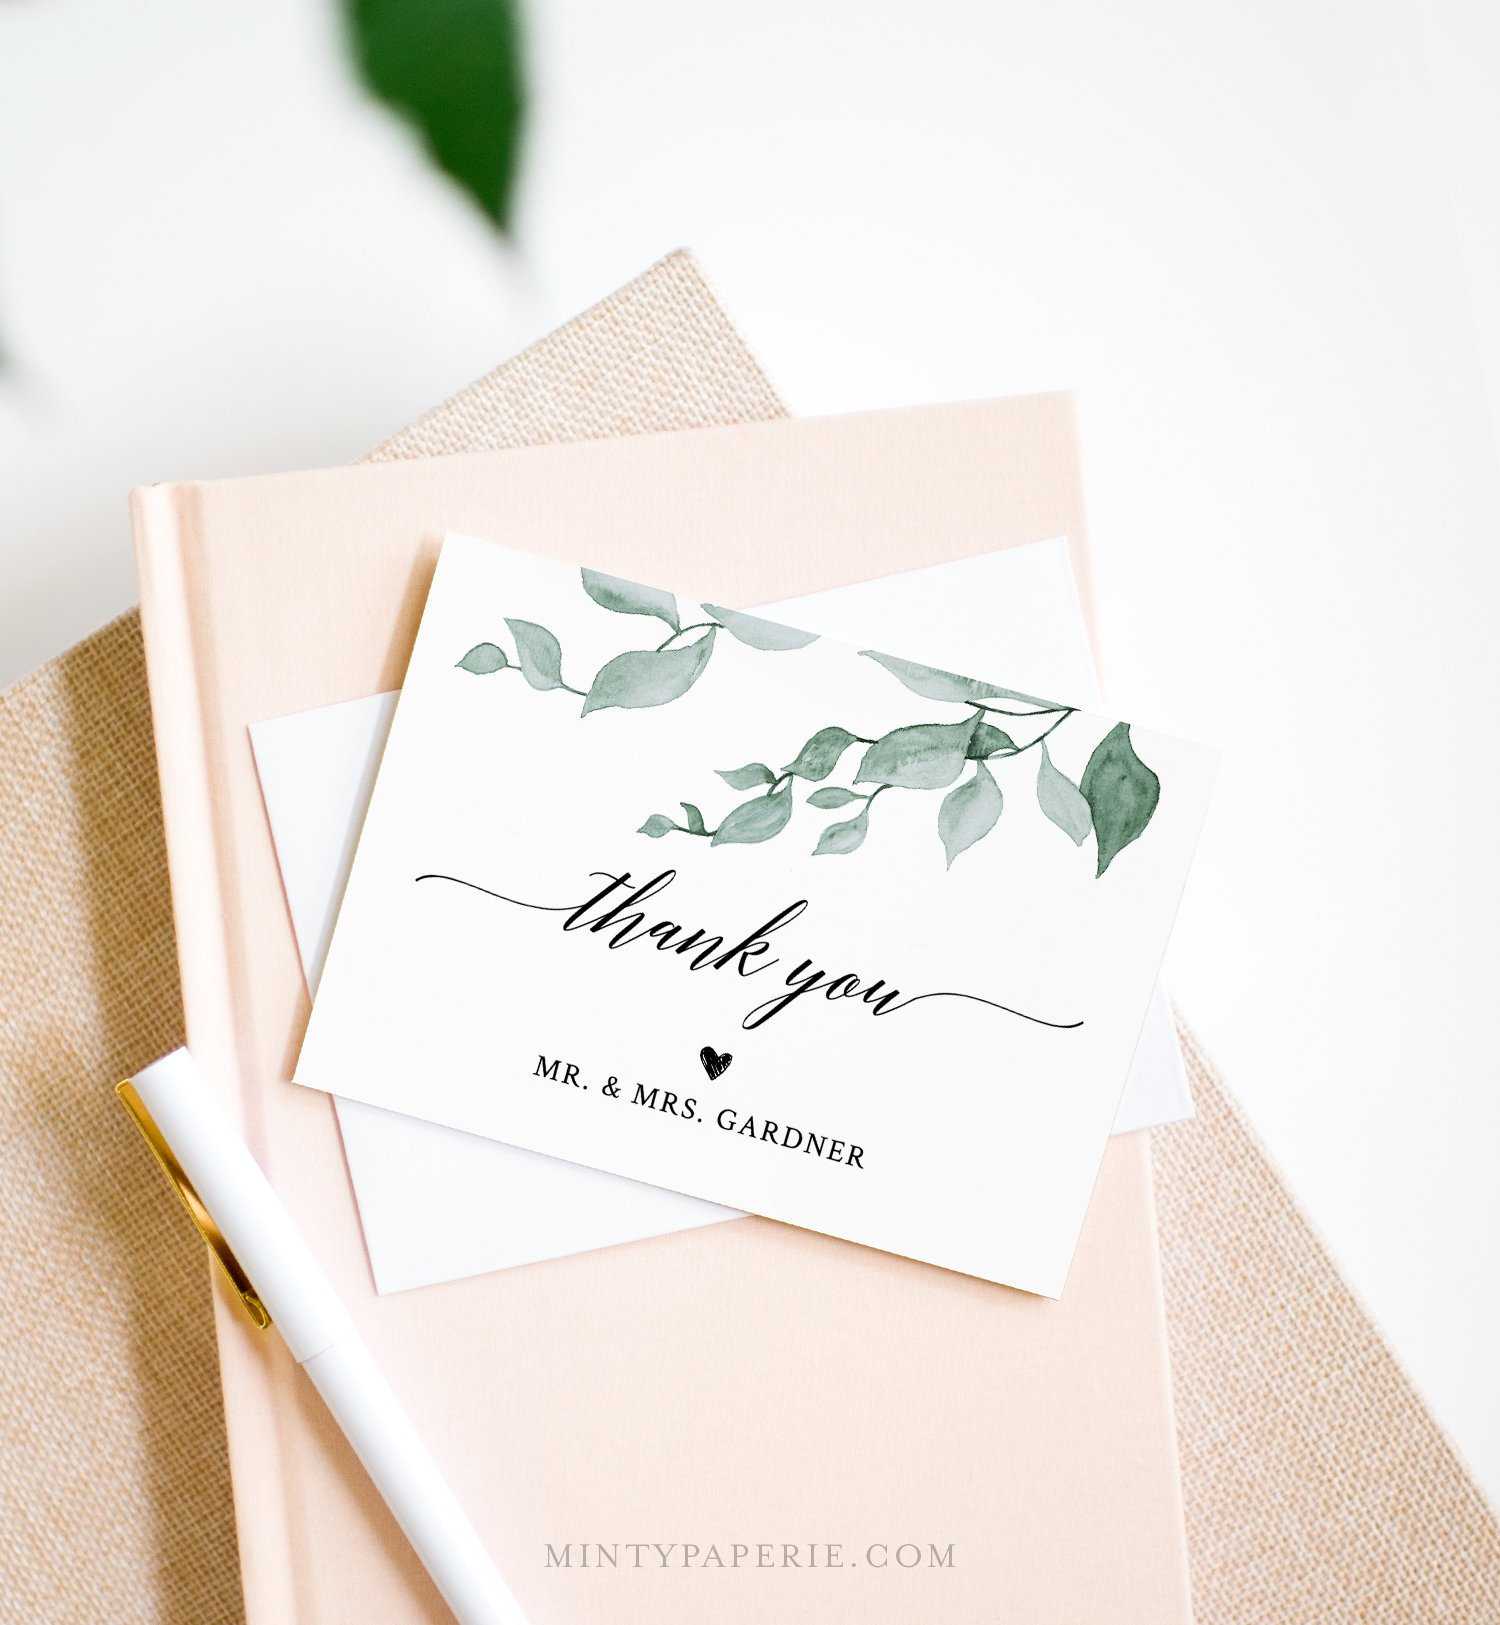 Greenery Thank You Note Card Template, Folded Wedding Or In Thank You Note Card Template